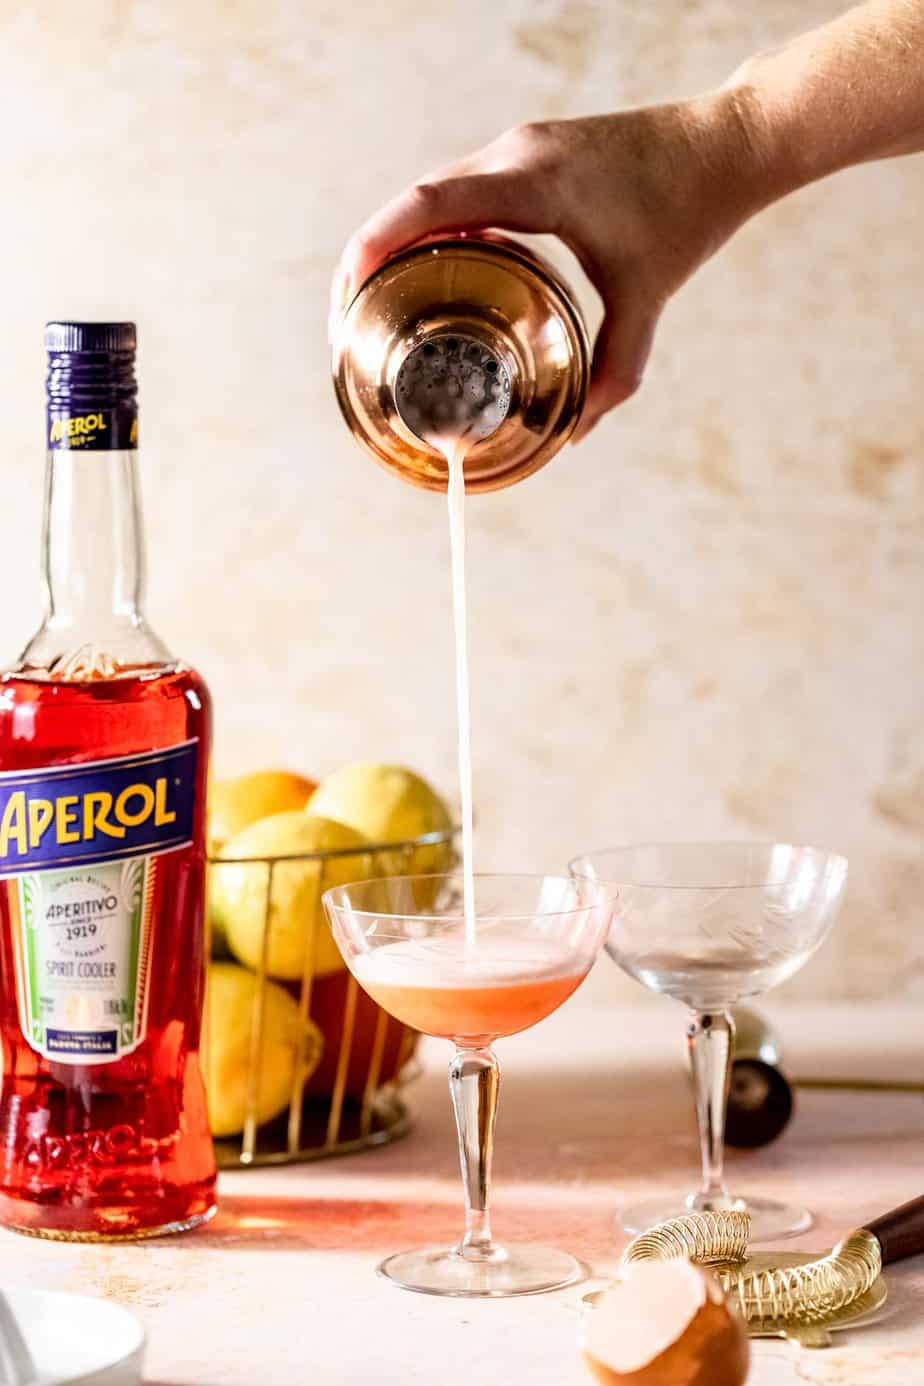 Aperol being poured into two serving glasses